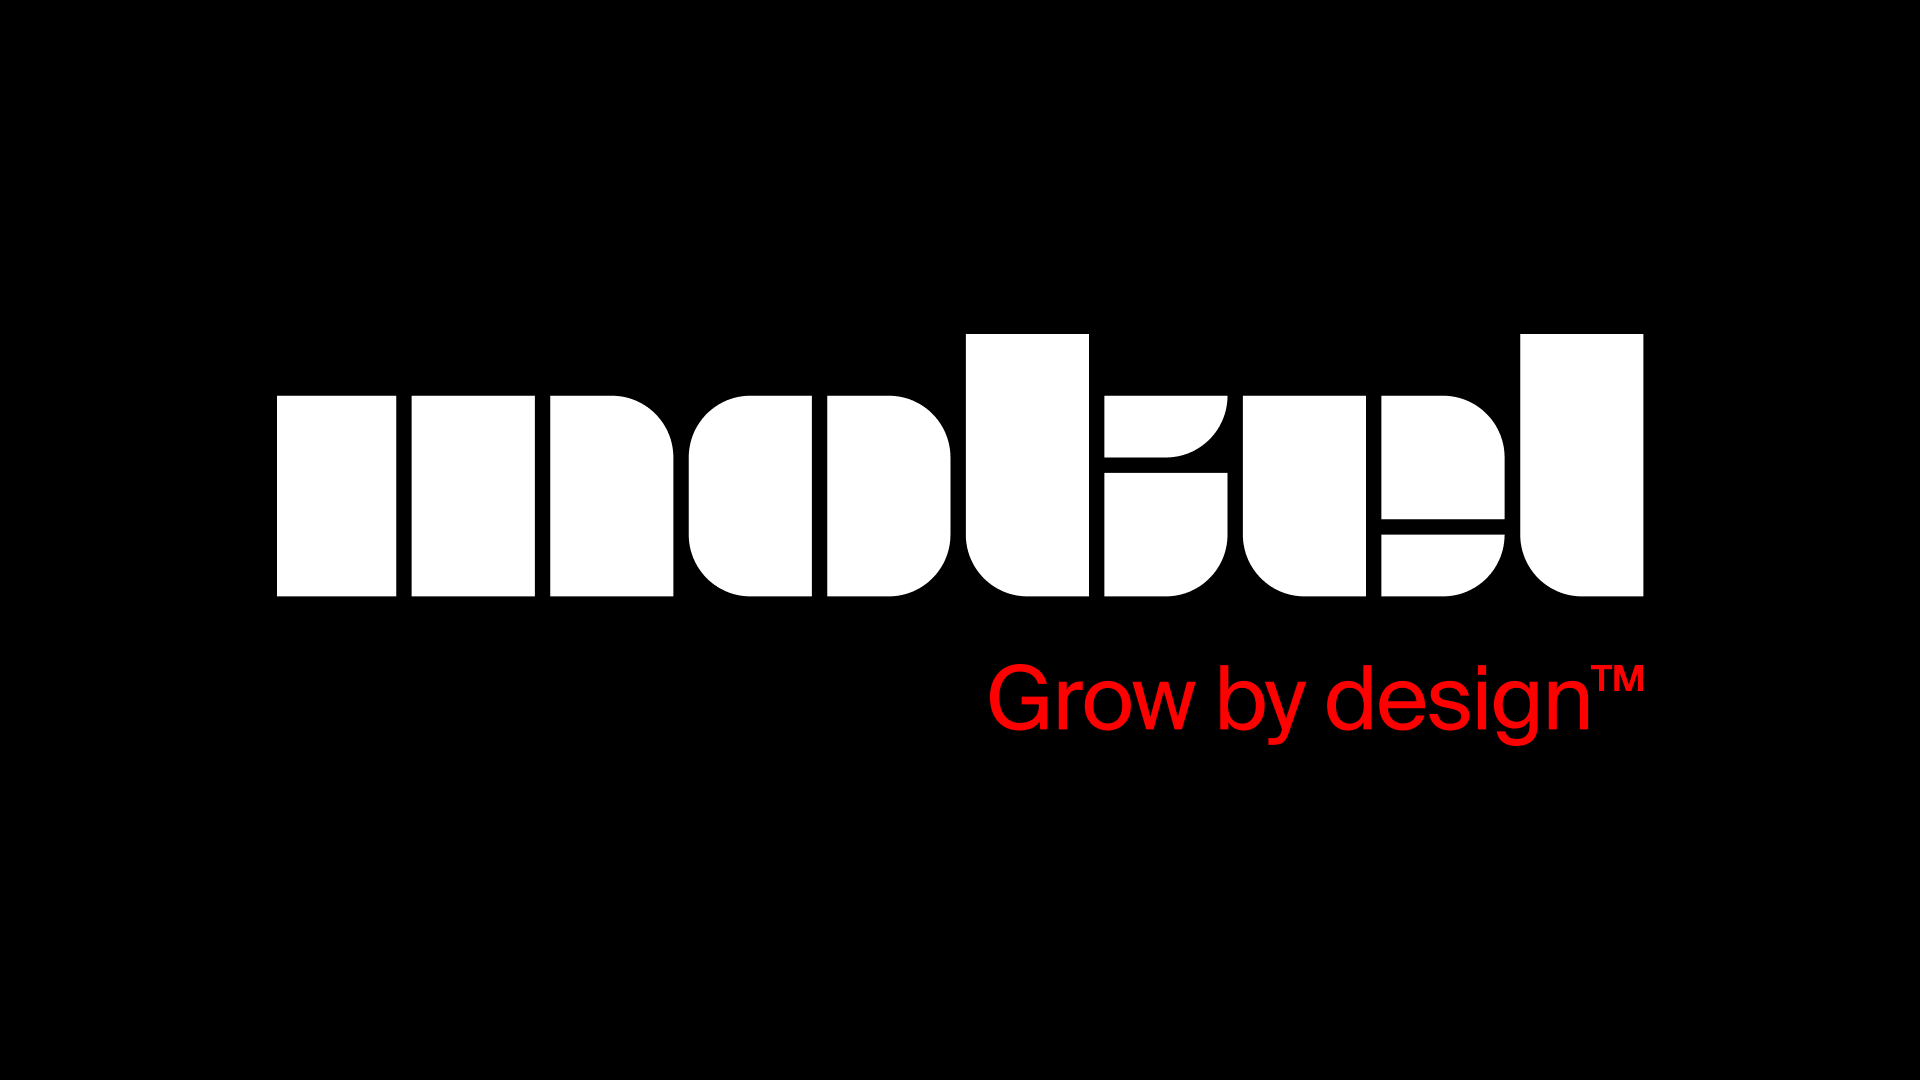 Motel | Grow by design. Brand, design and digital powers business growth.